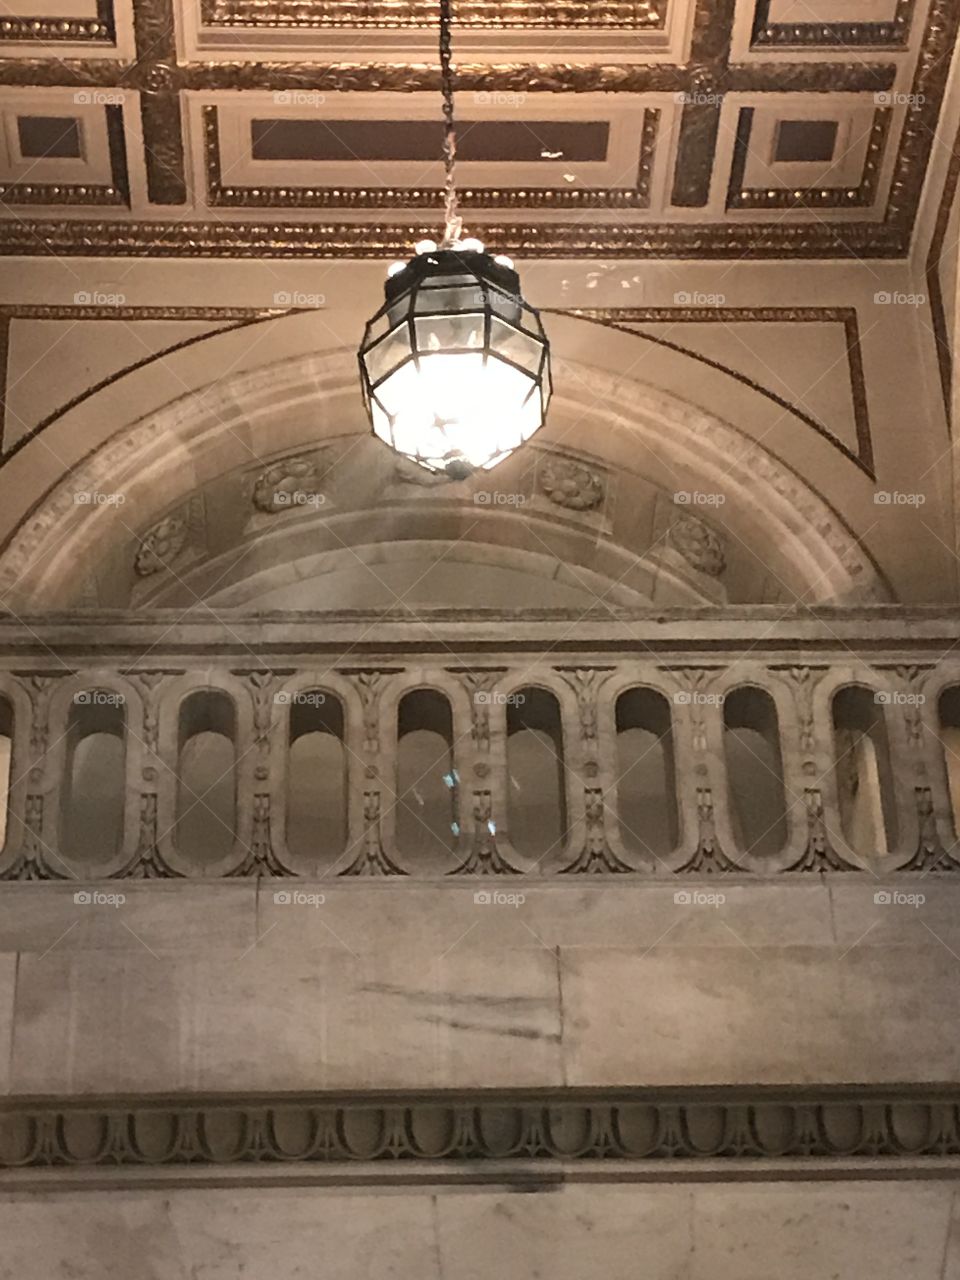 Antique Architecture NYC Library 